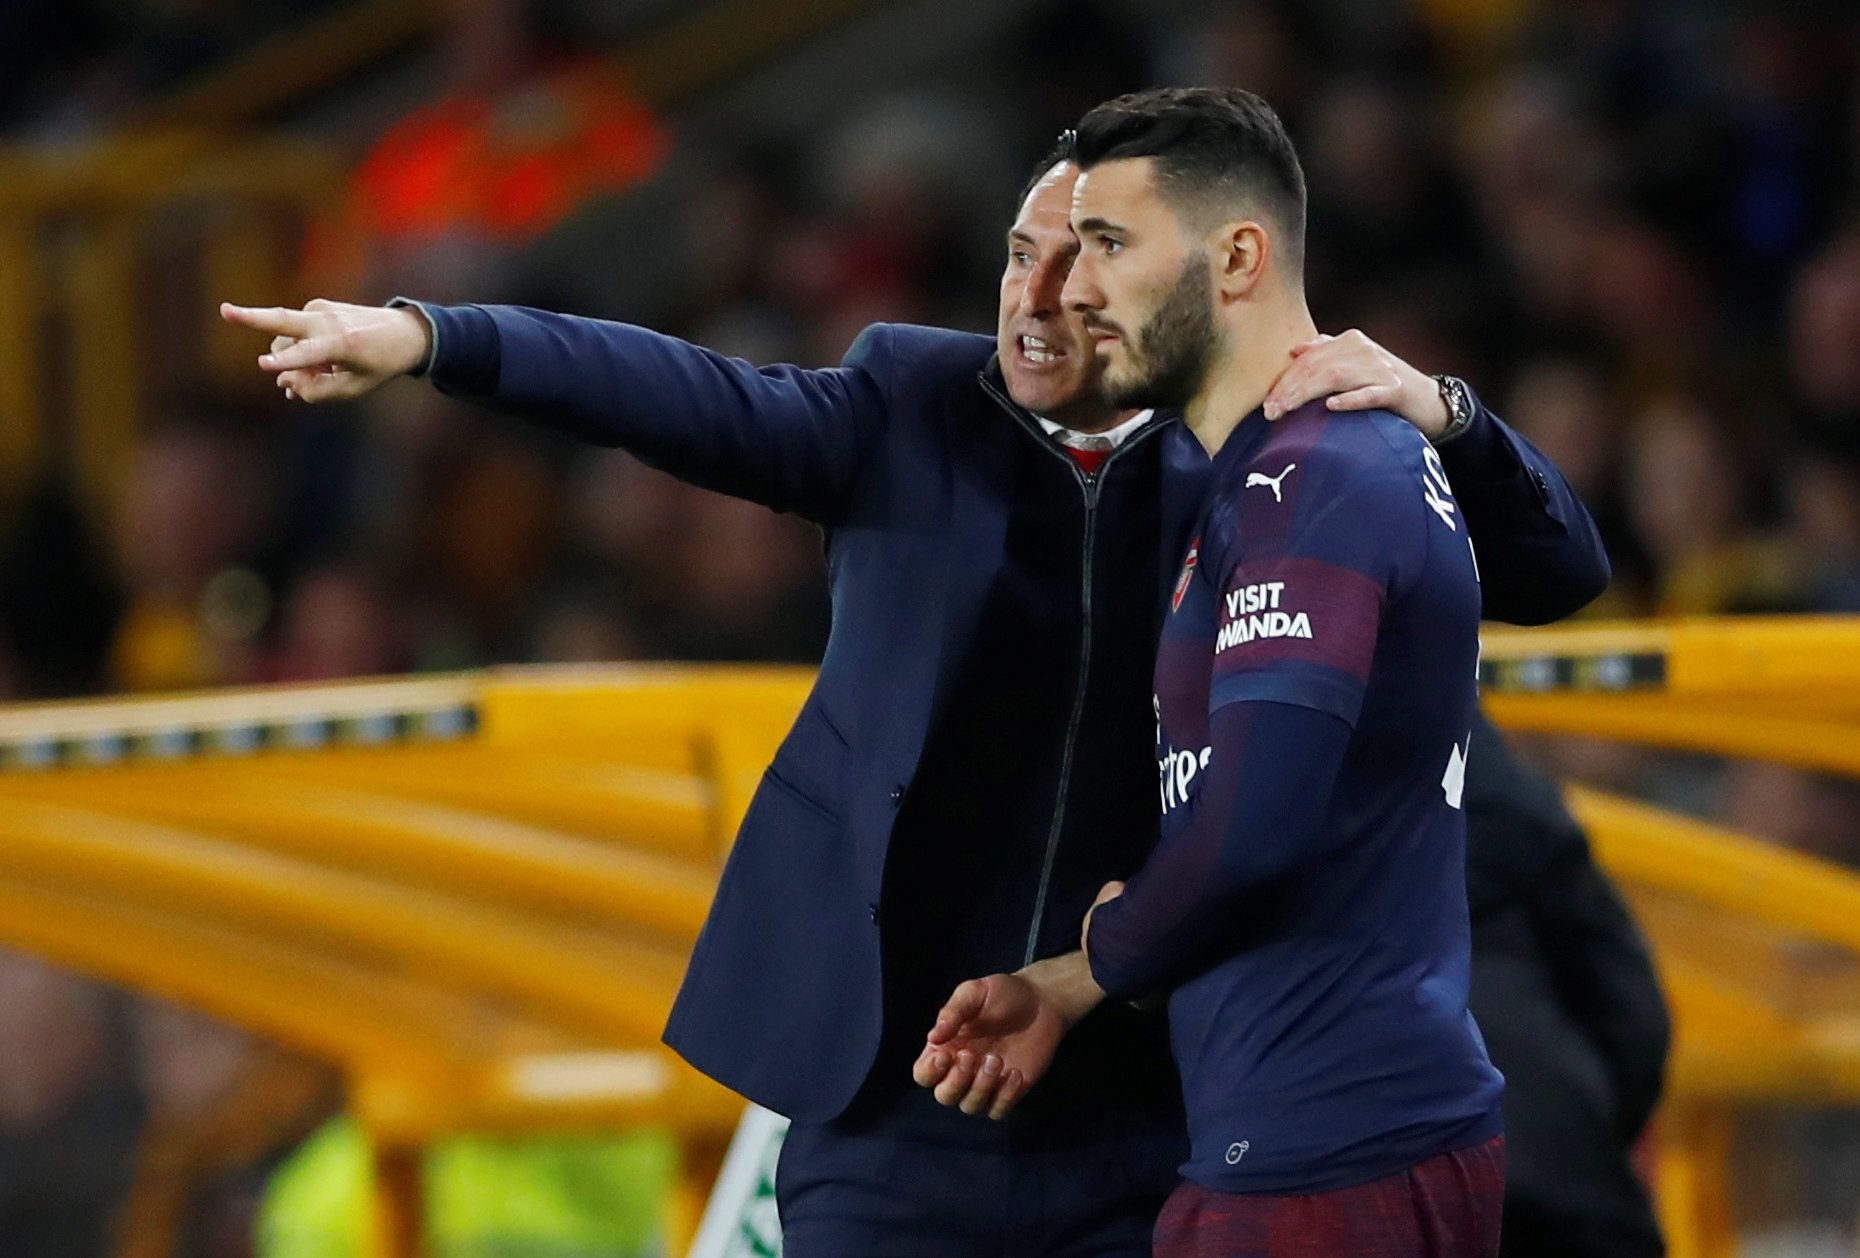 Soccer Football - Wolverhampton Wanderers v Arsenal - Molineux Stadium, Wolverhampton, Britain - April 24, 2019  Arsenal manager Unai Emery talks to Sead Kolasinac   REUTERS/Eddie Keogh  EDITORIAL USE ONLY. No use with unauthorized audio, video, data, fixture lists, club/league logos or 